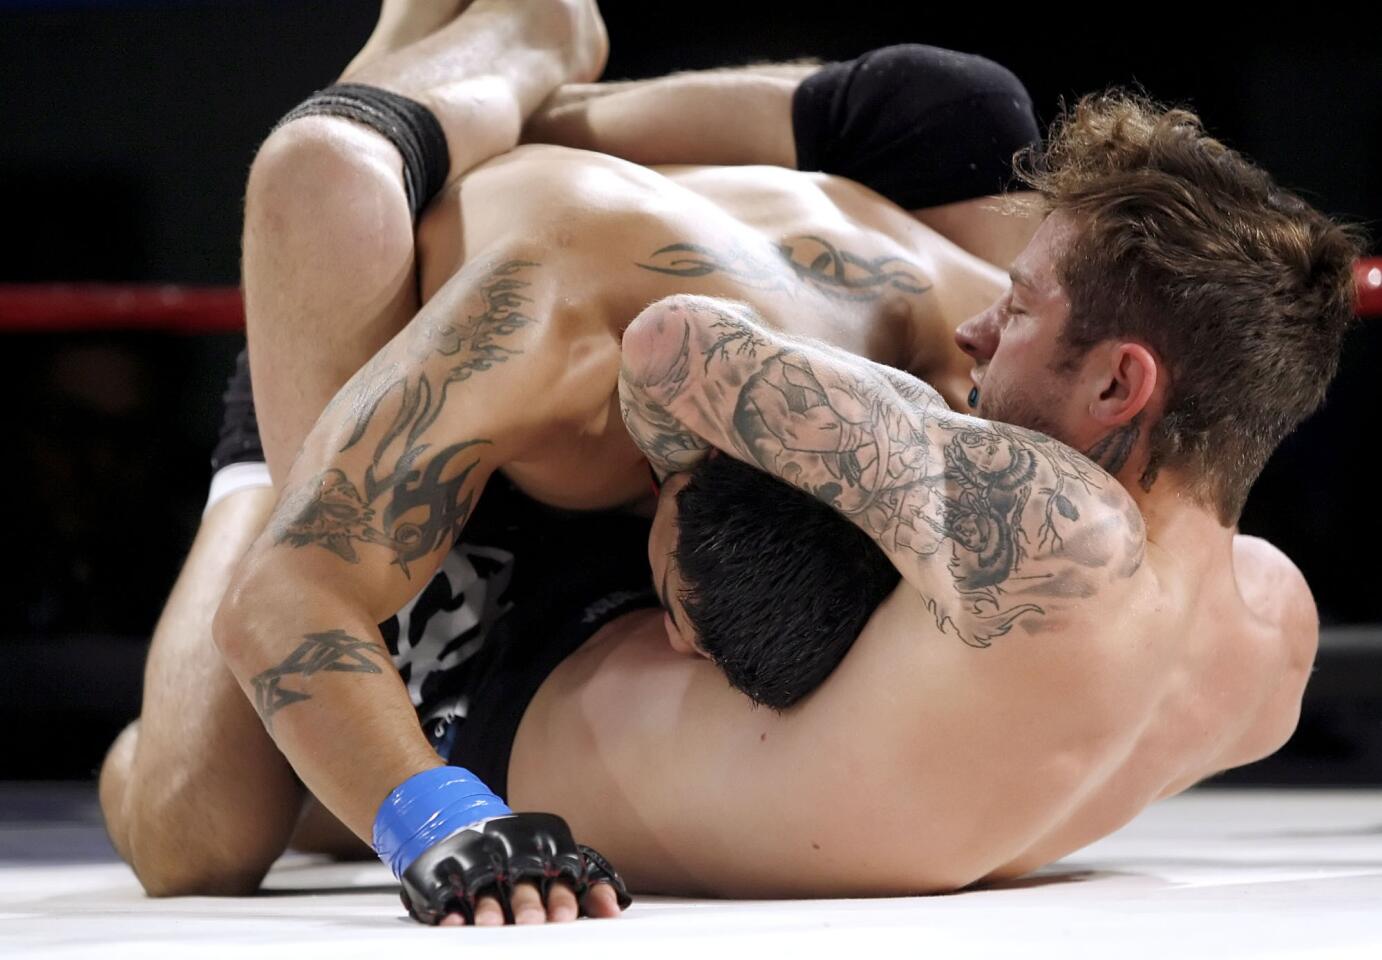 MMA fighter Chris Bradley, right, chokes his opponent Bobby Sanchez, left, into submission during the Chaos at the Casino Event at Hollywood Park Casino in Inglewood on Saturday, May 5, 2012.